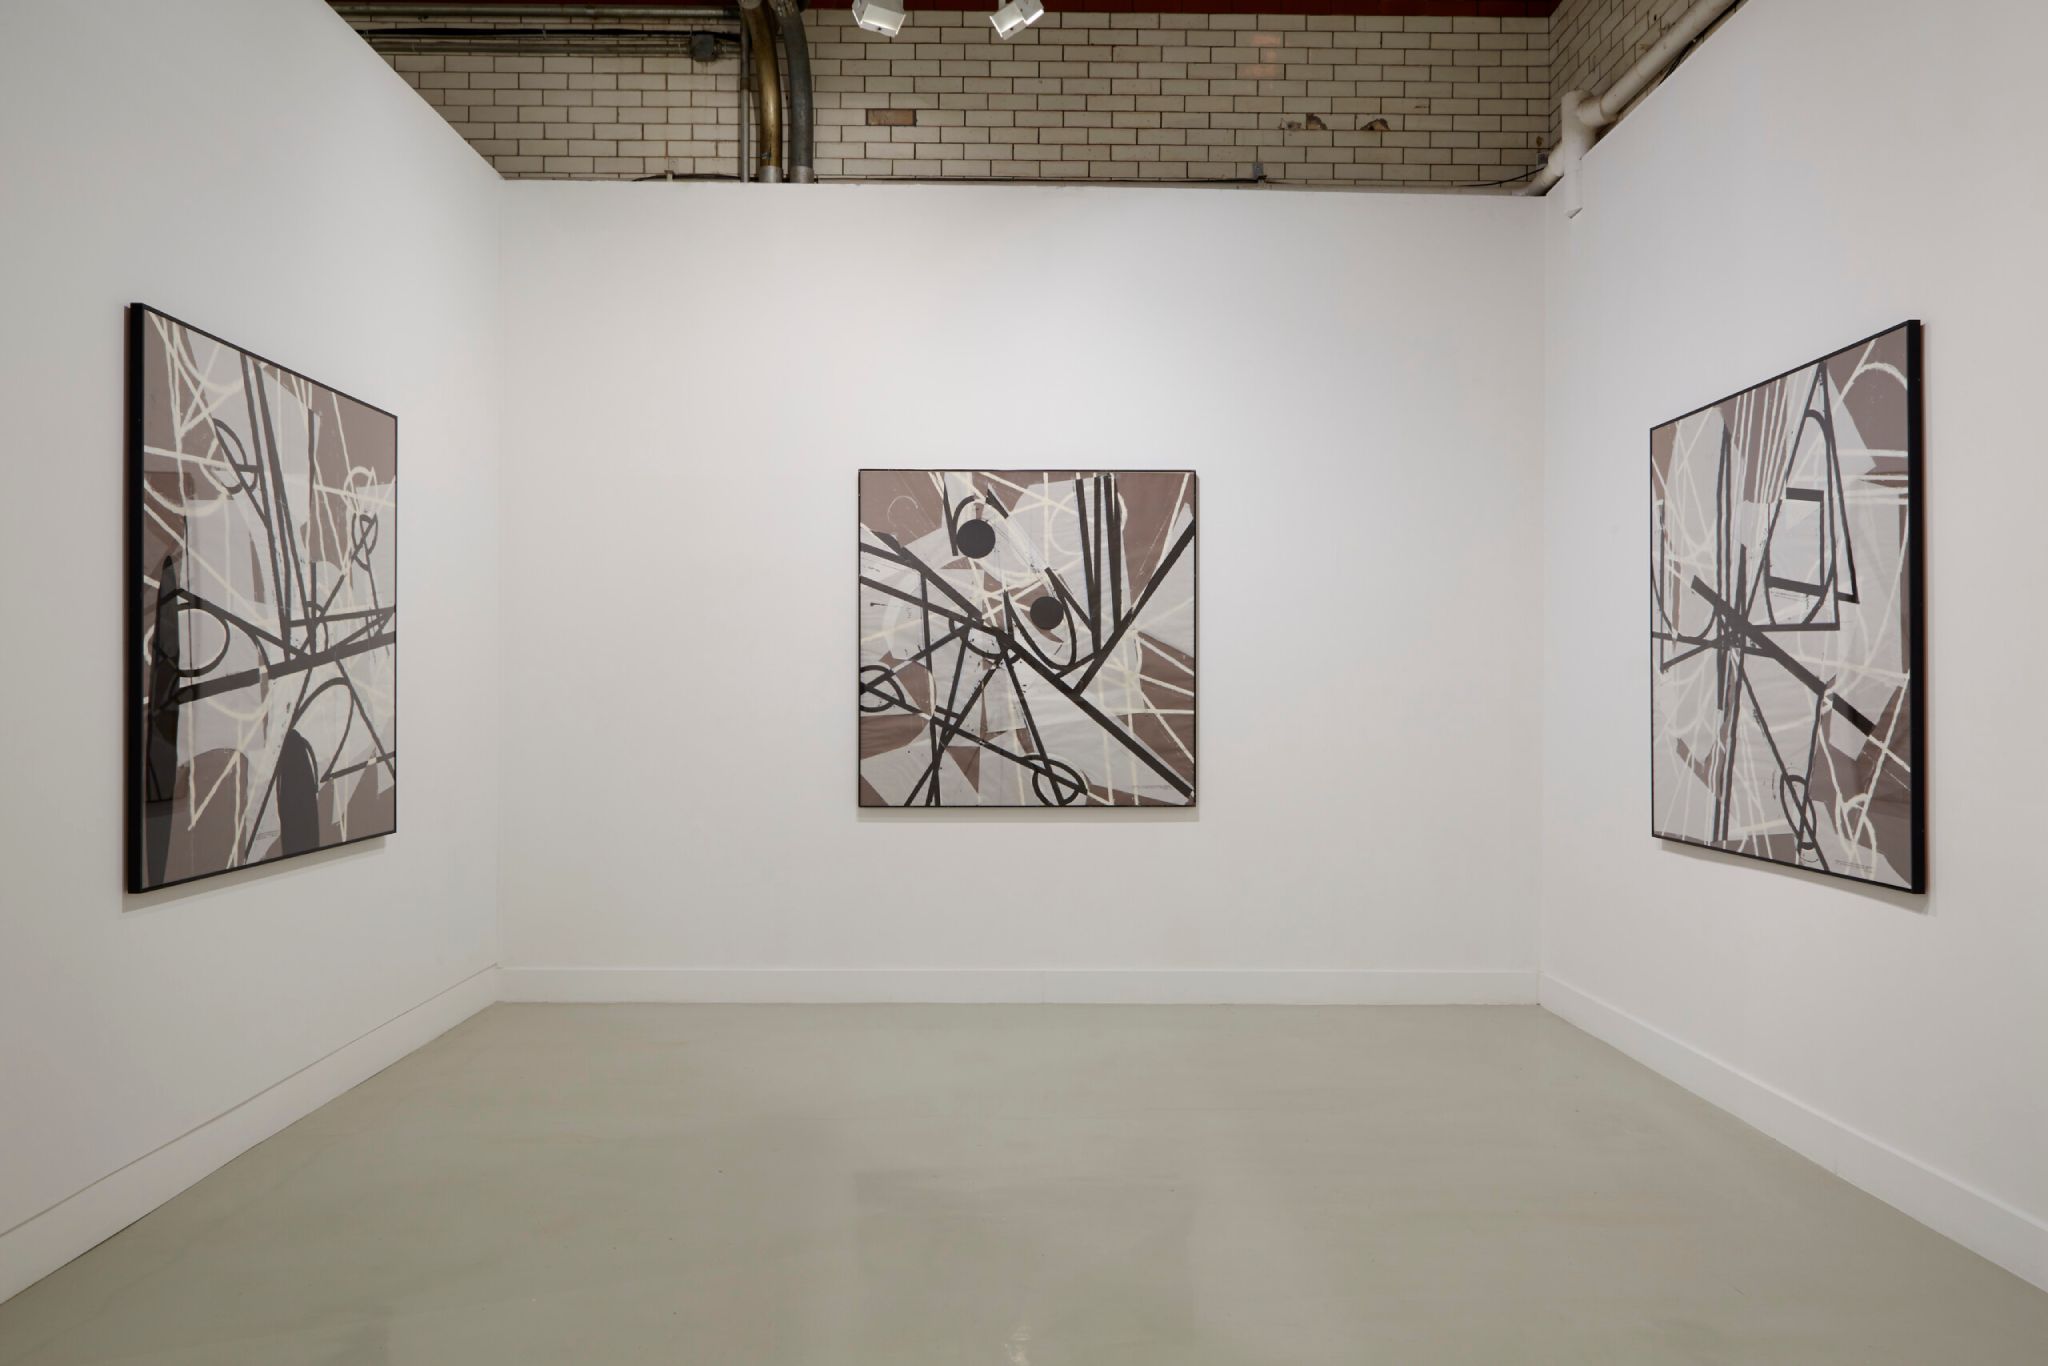 Installation view from "Coordinates: Drawings and Prints Marking Five Exhibitions at Beaver College (1977-84)" with three panels featuring monochromatic geometric designs in white, black, and brown.